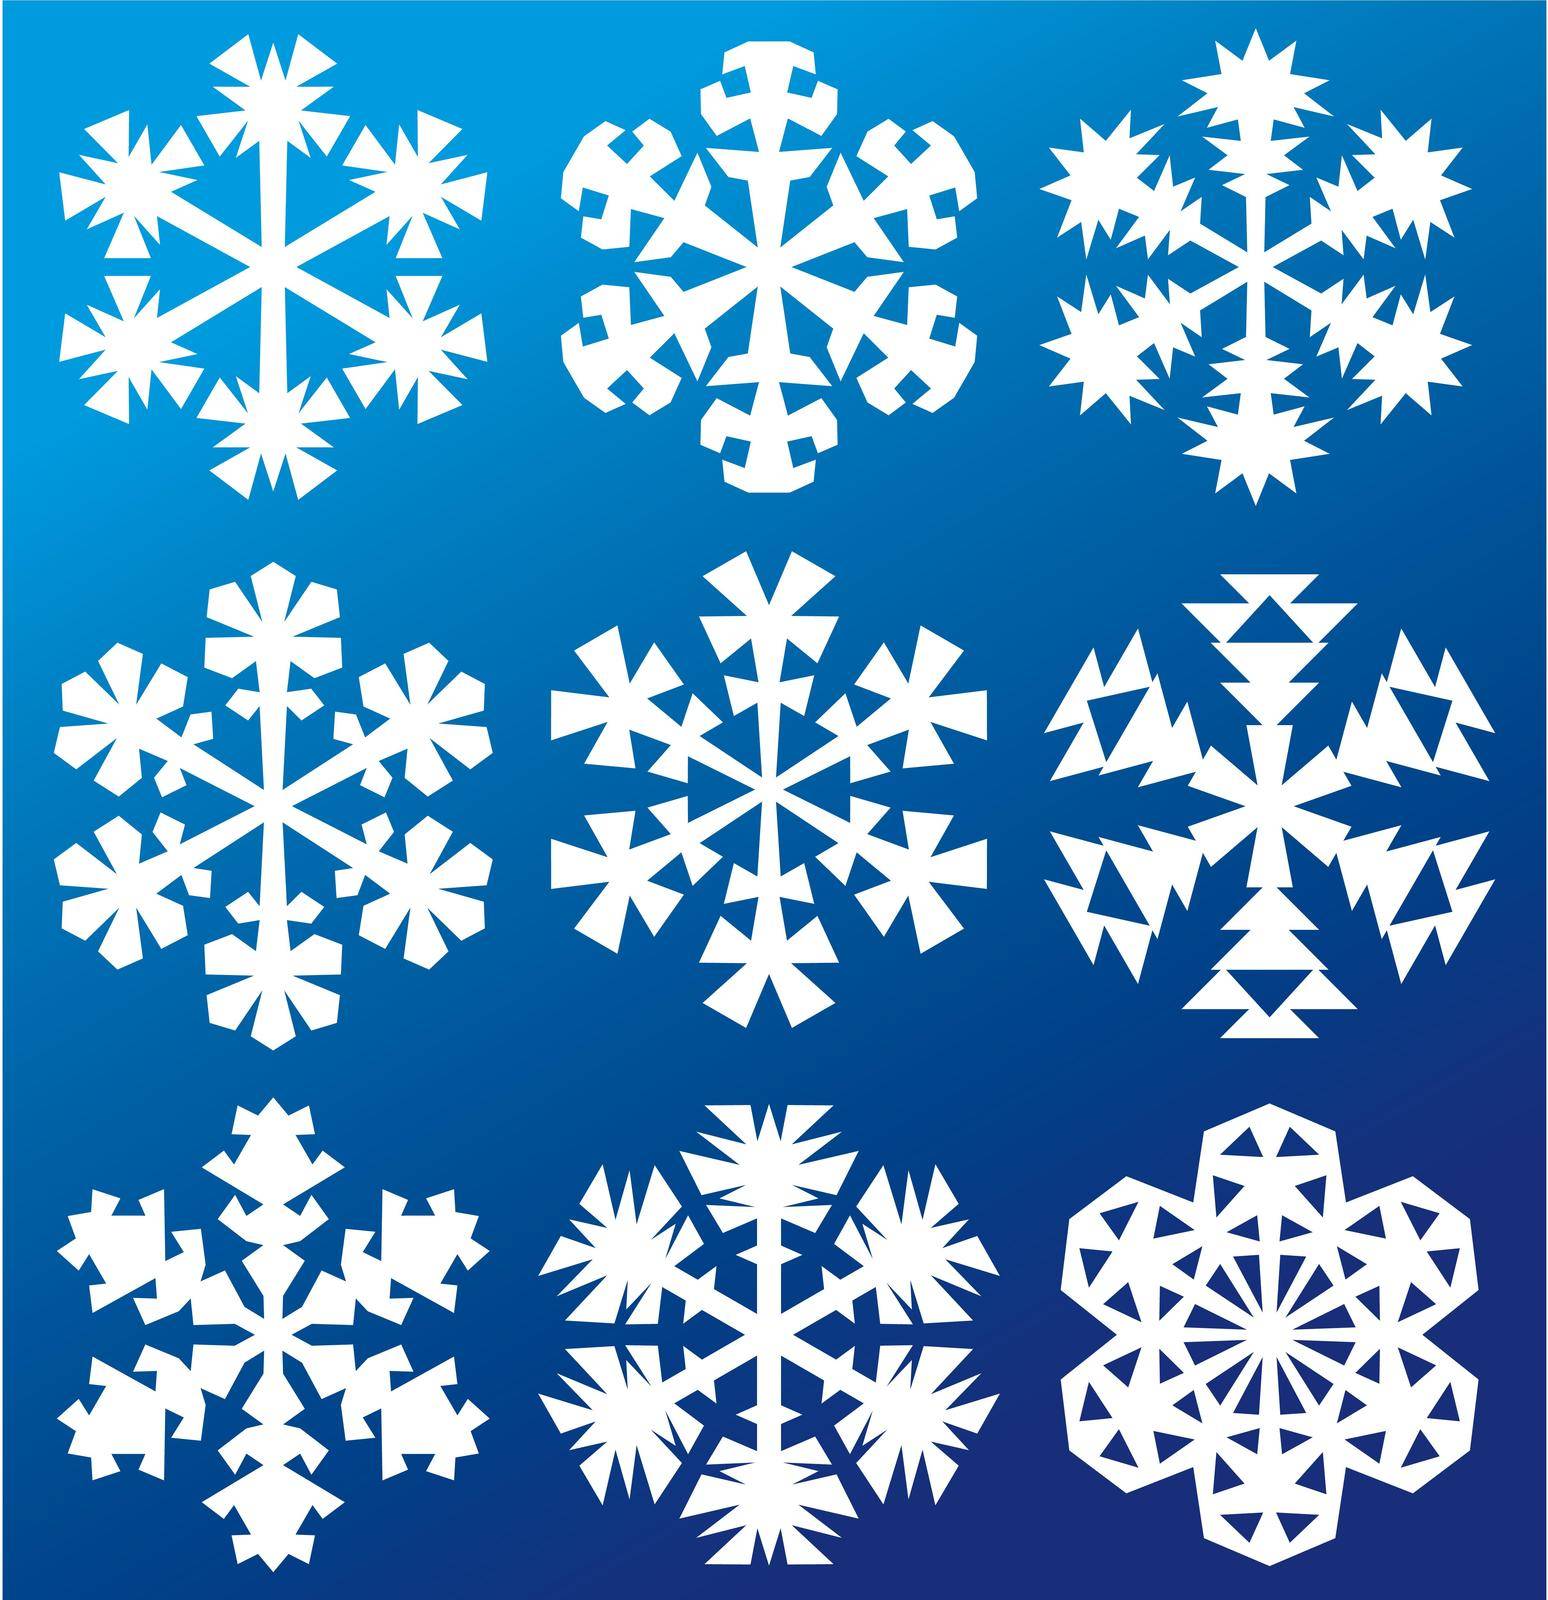 Collection of snowflakes by TribaliumArt